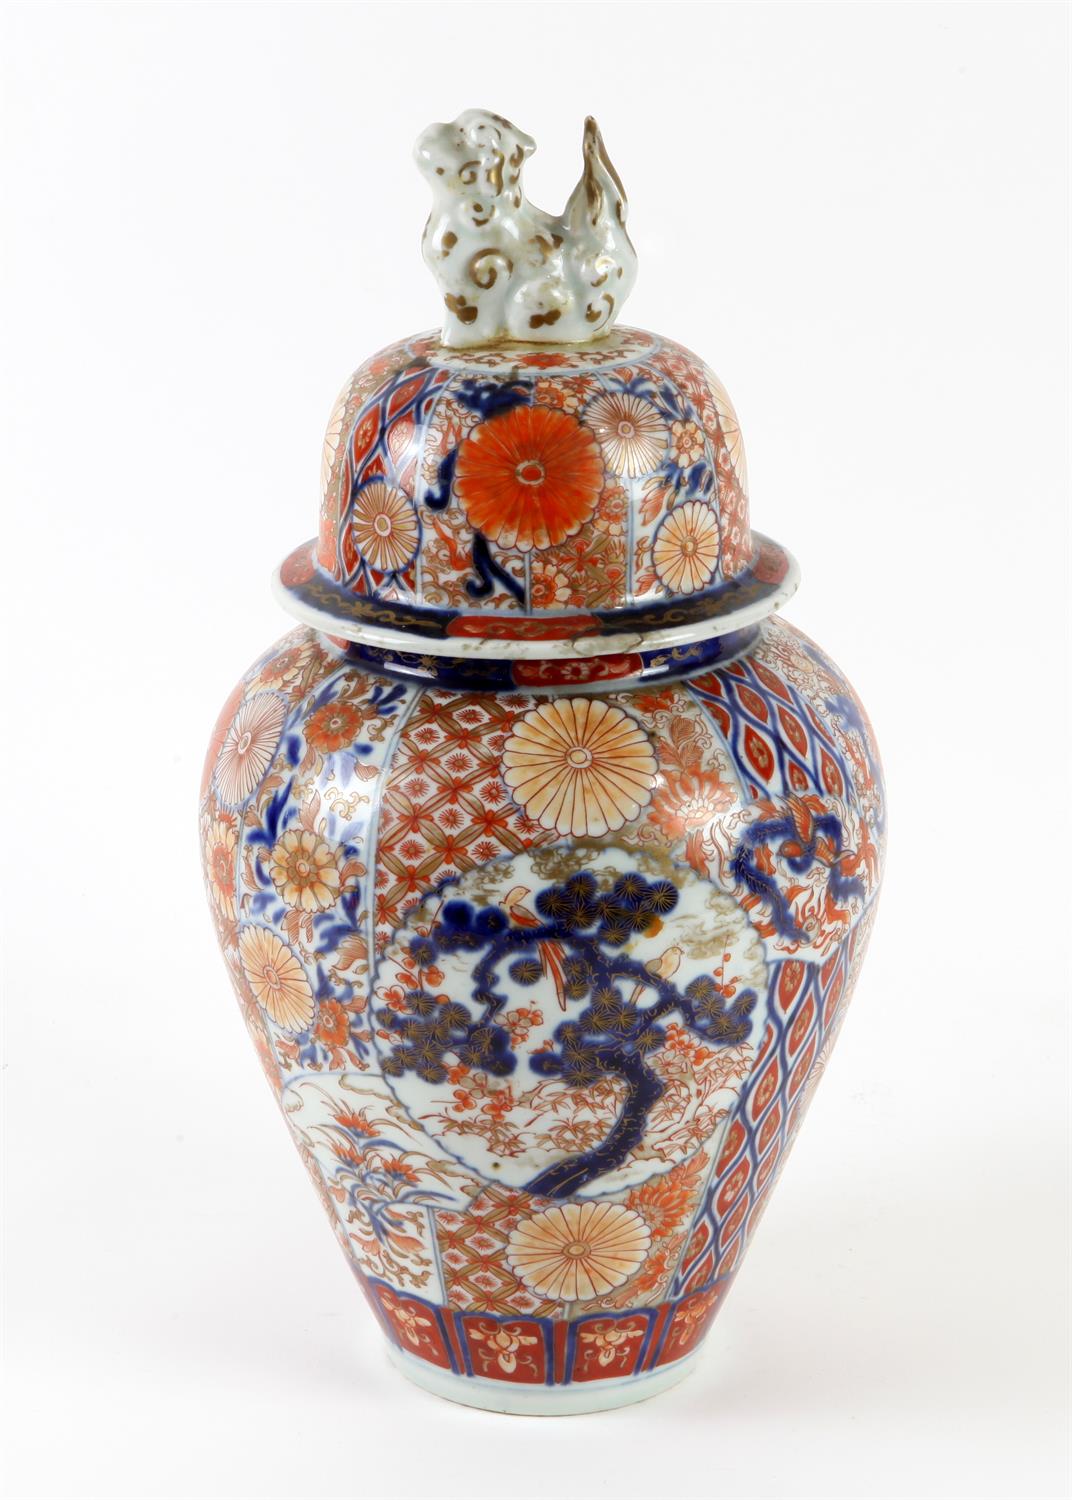 Arita (Imari) baluster vase with cover Meiji period typically decorated in underglaze blue and iron